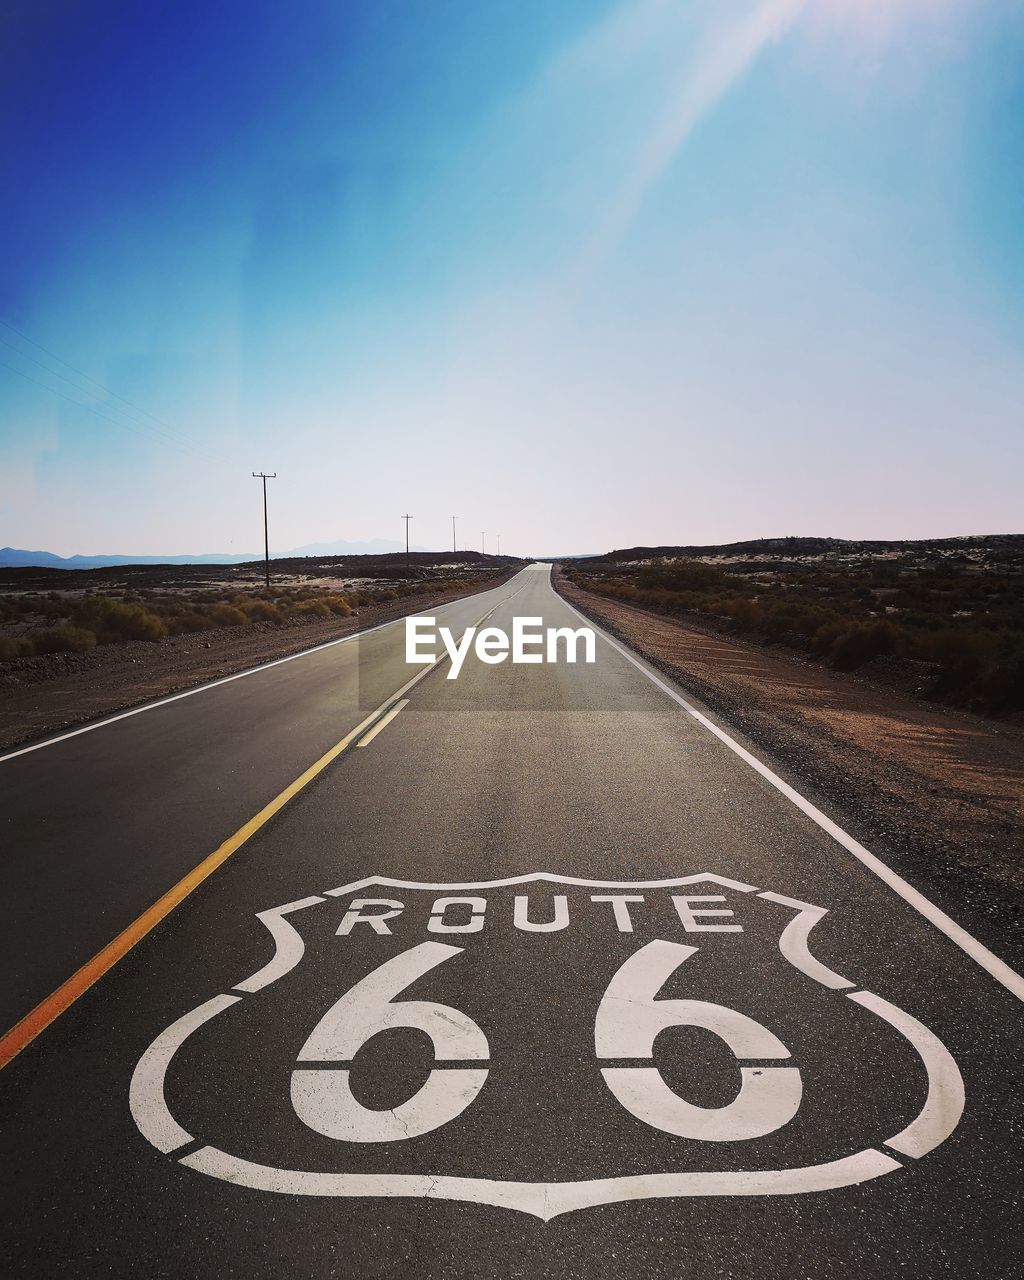 Route 66 written on road against blue sky